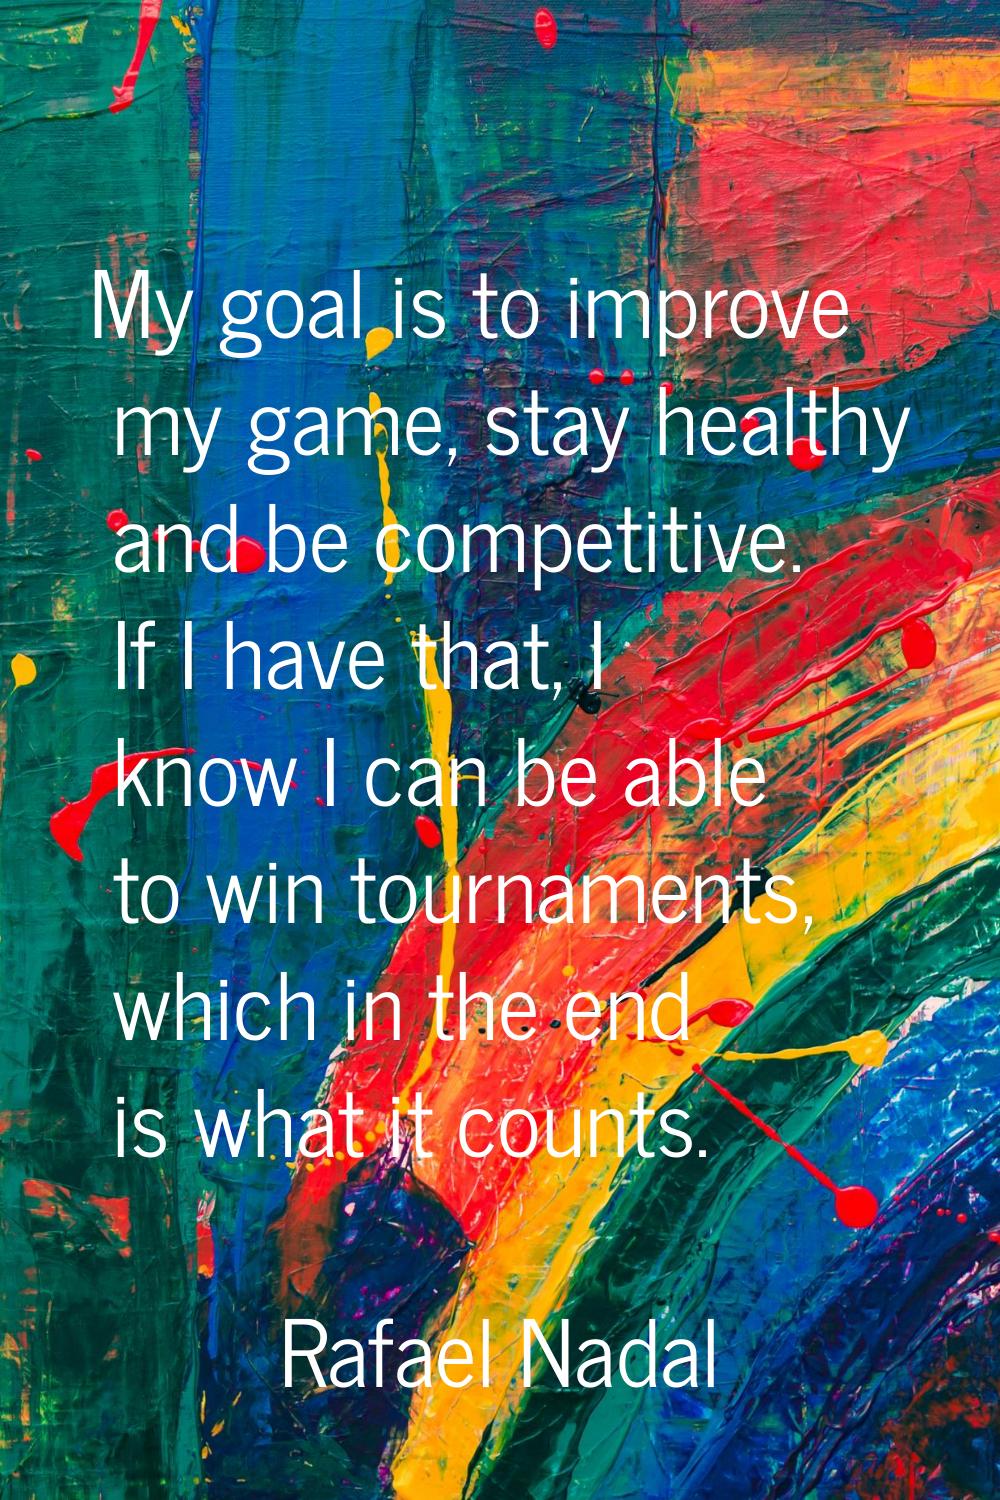 My goal is to improve my game, stay healthy and be competitive. If I have that, I know I can be abl